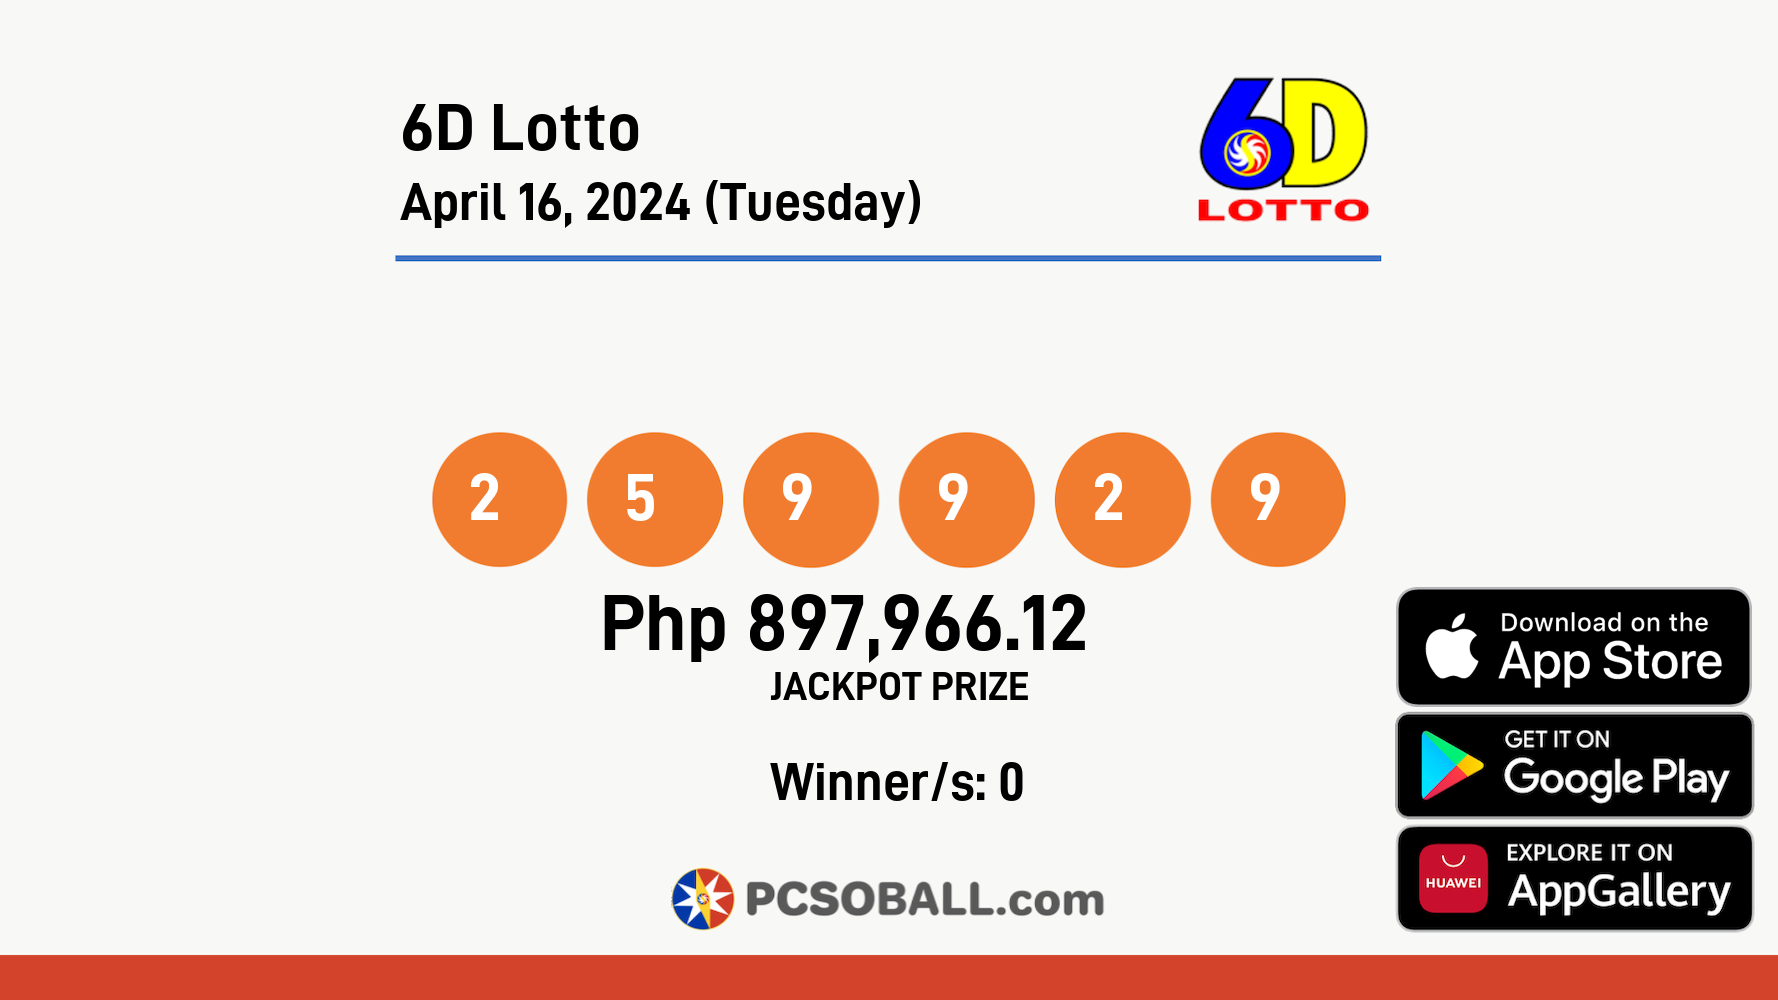 6D Lotto April 16, 2024 (Tuesday) Result